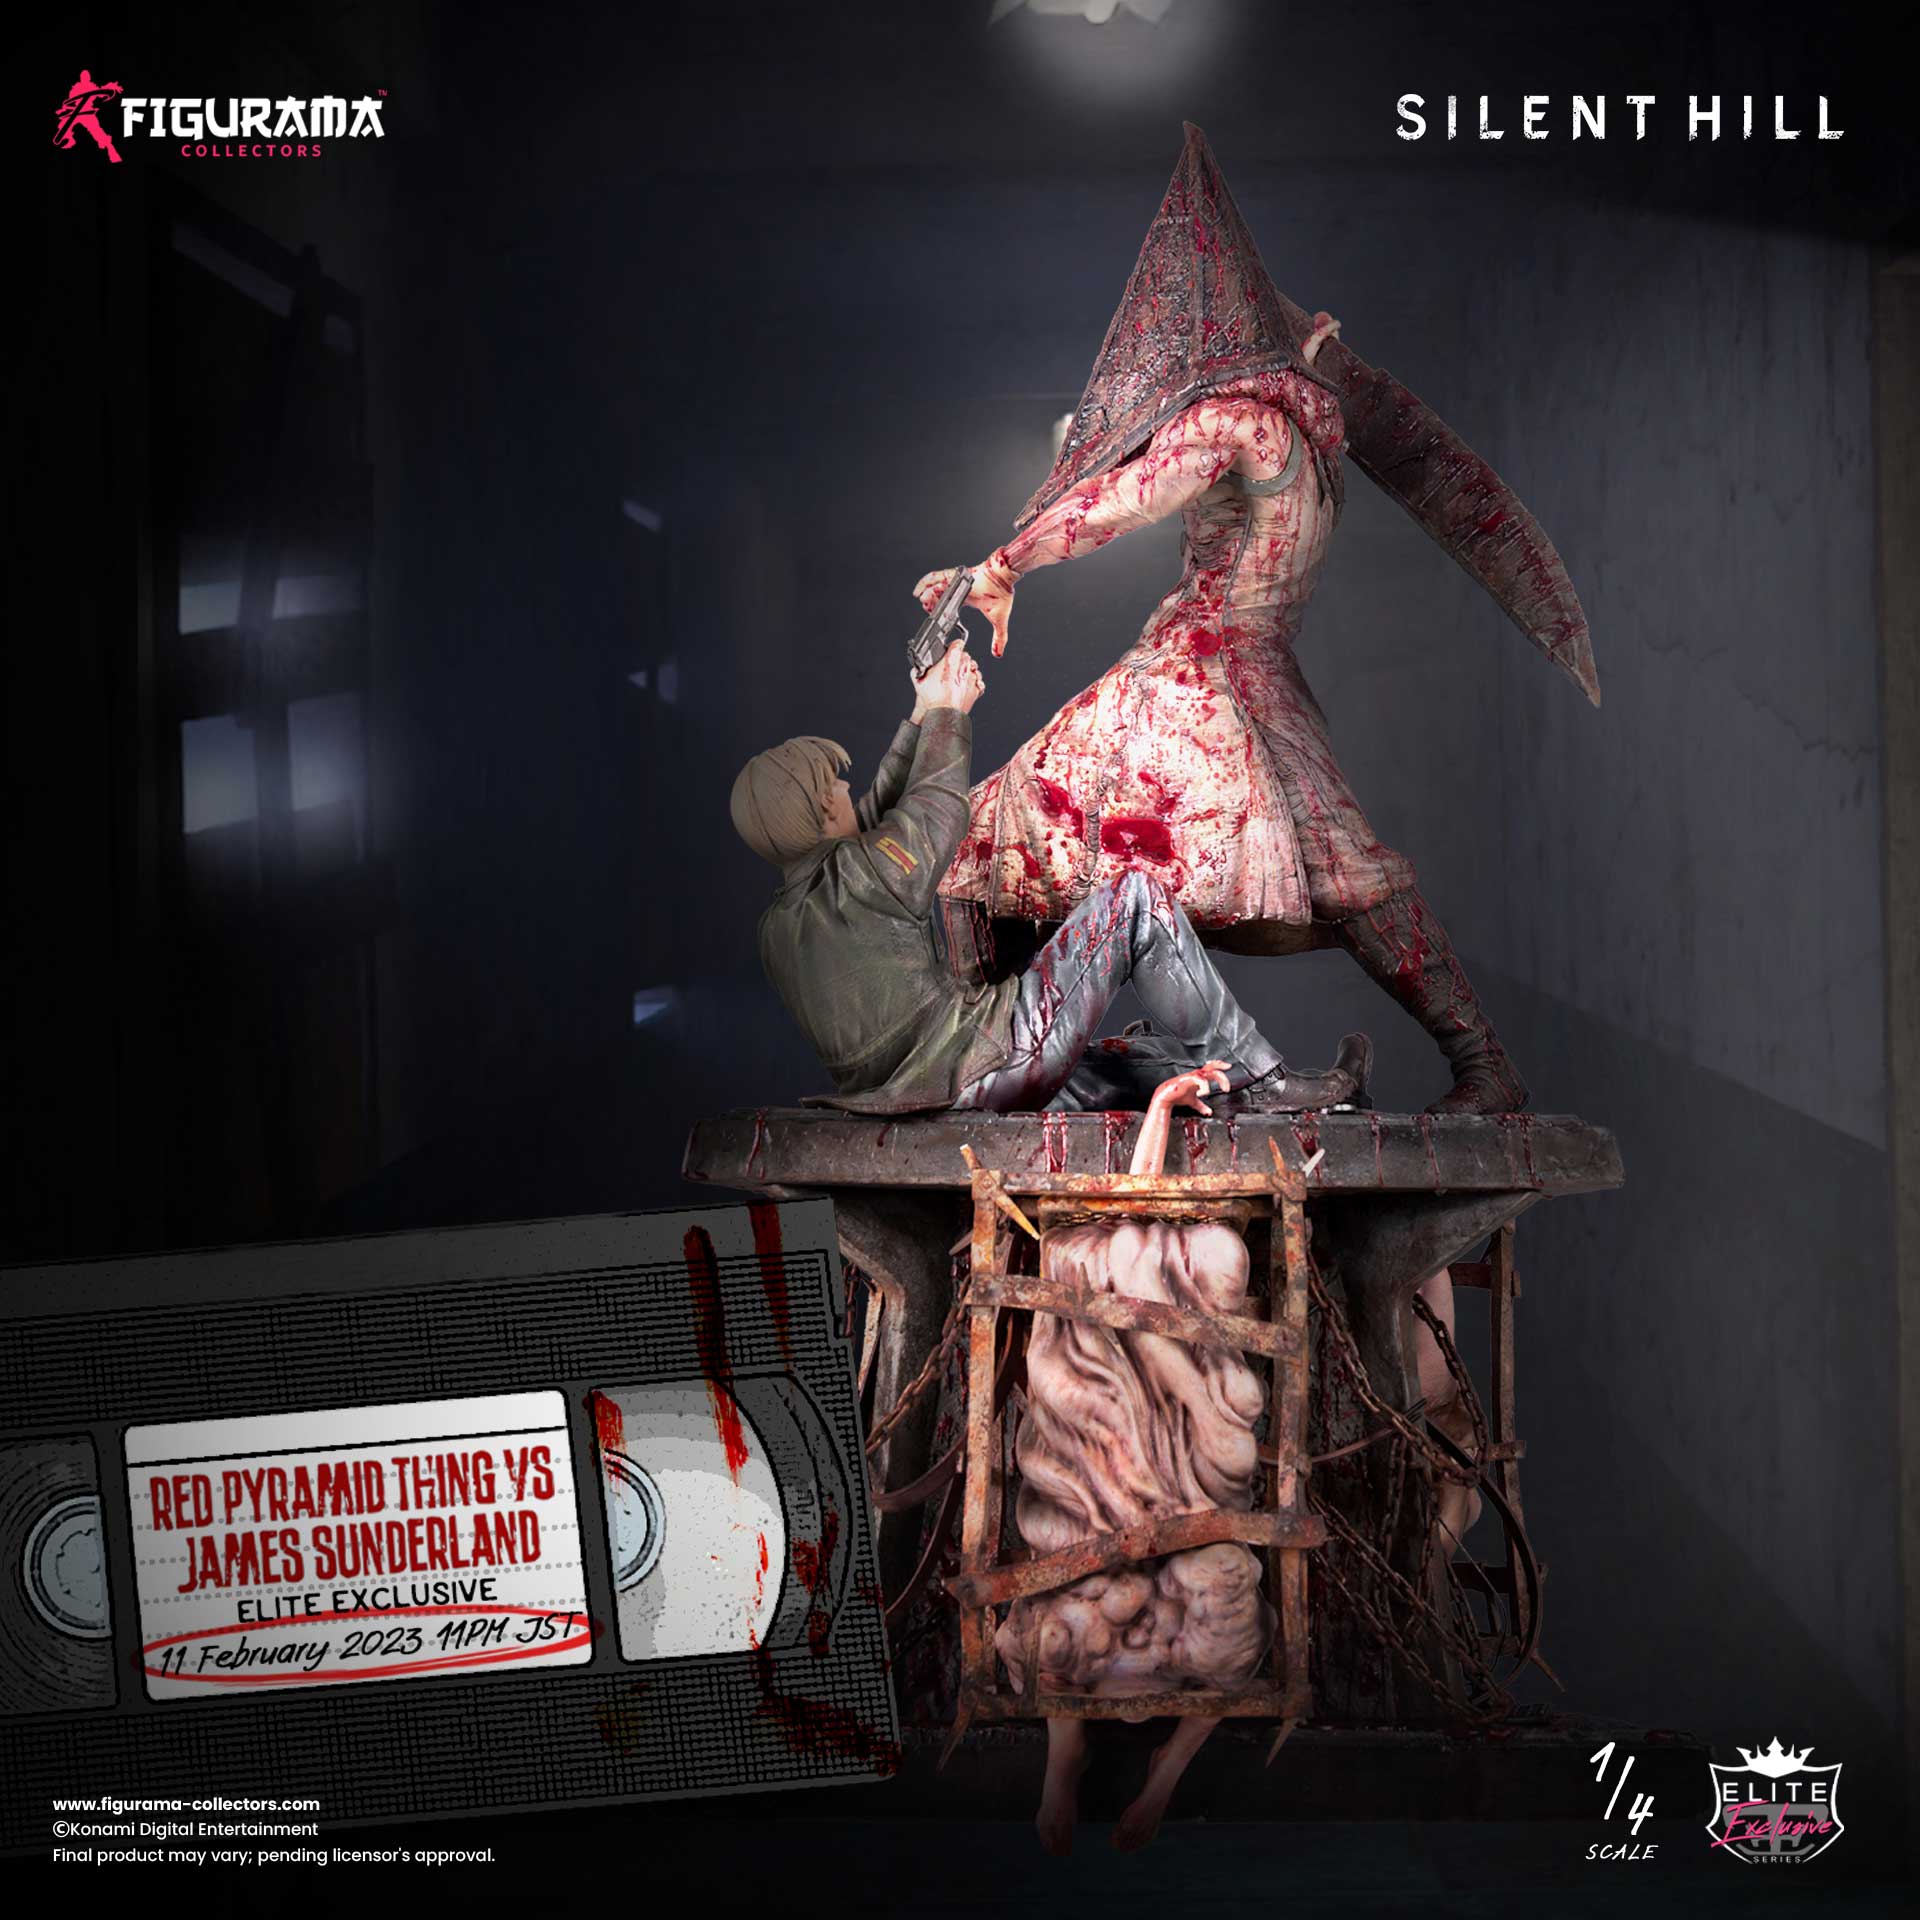 Pyramid Head's Great Knife silent Hill 2 / Dead by -  Israel